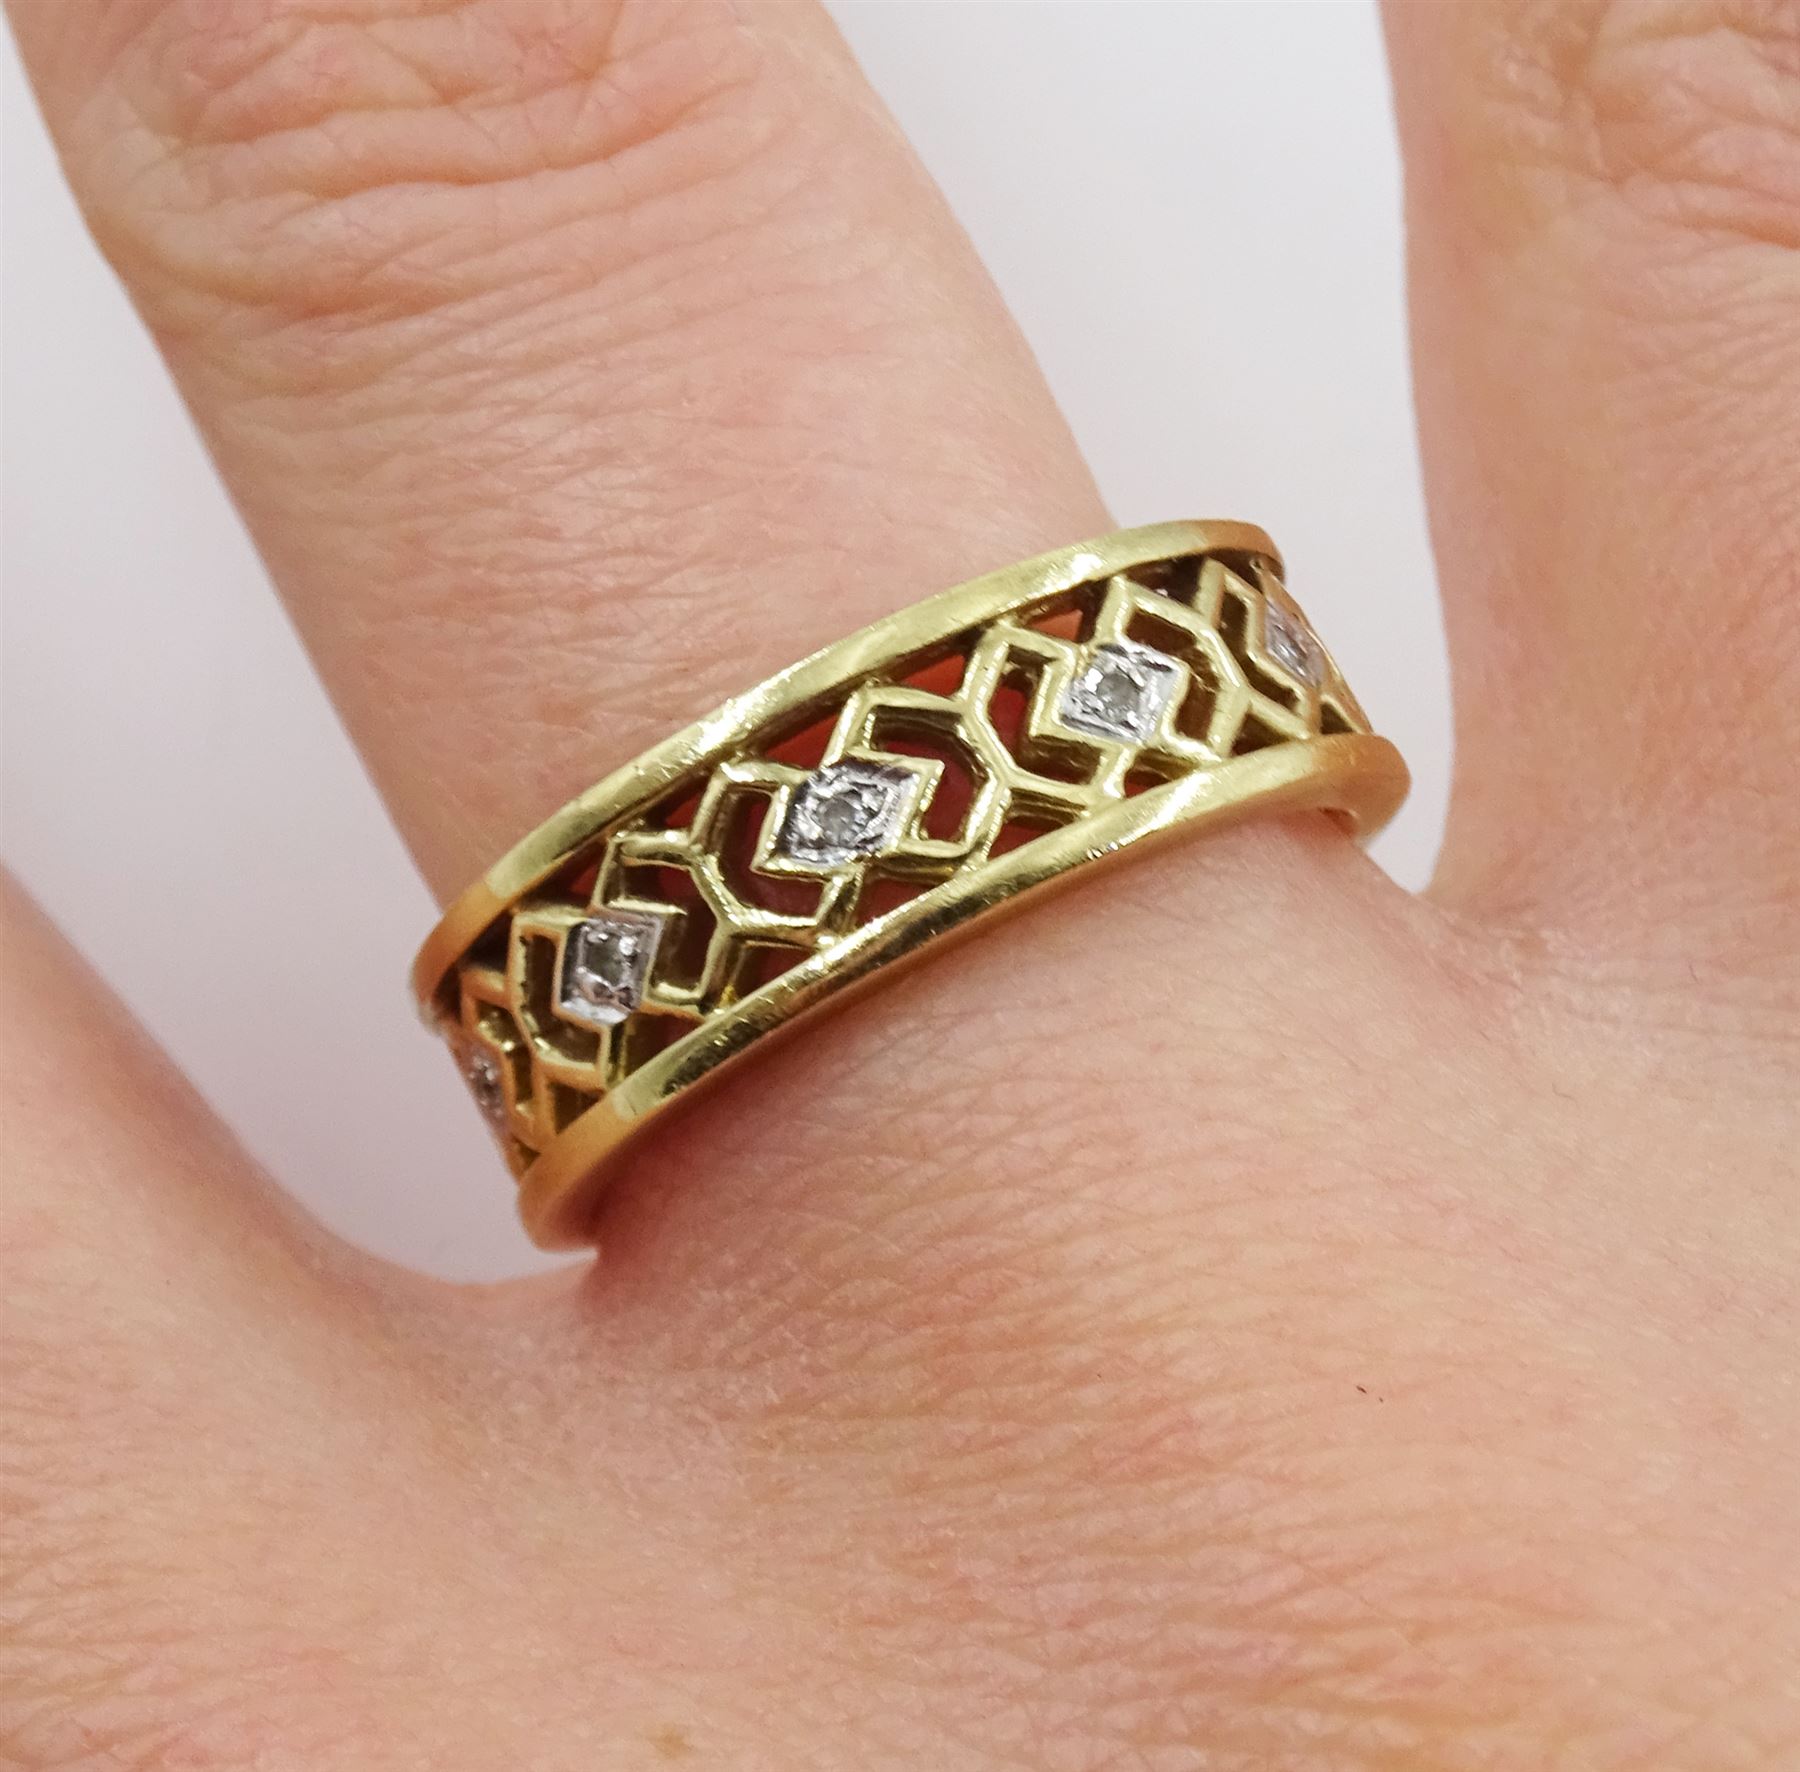 9ct gold pierced abstract design diamond ring - Image 2 of 4